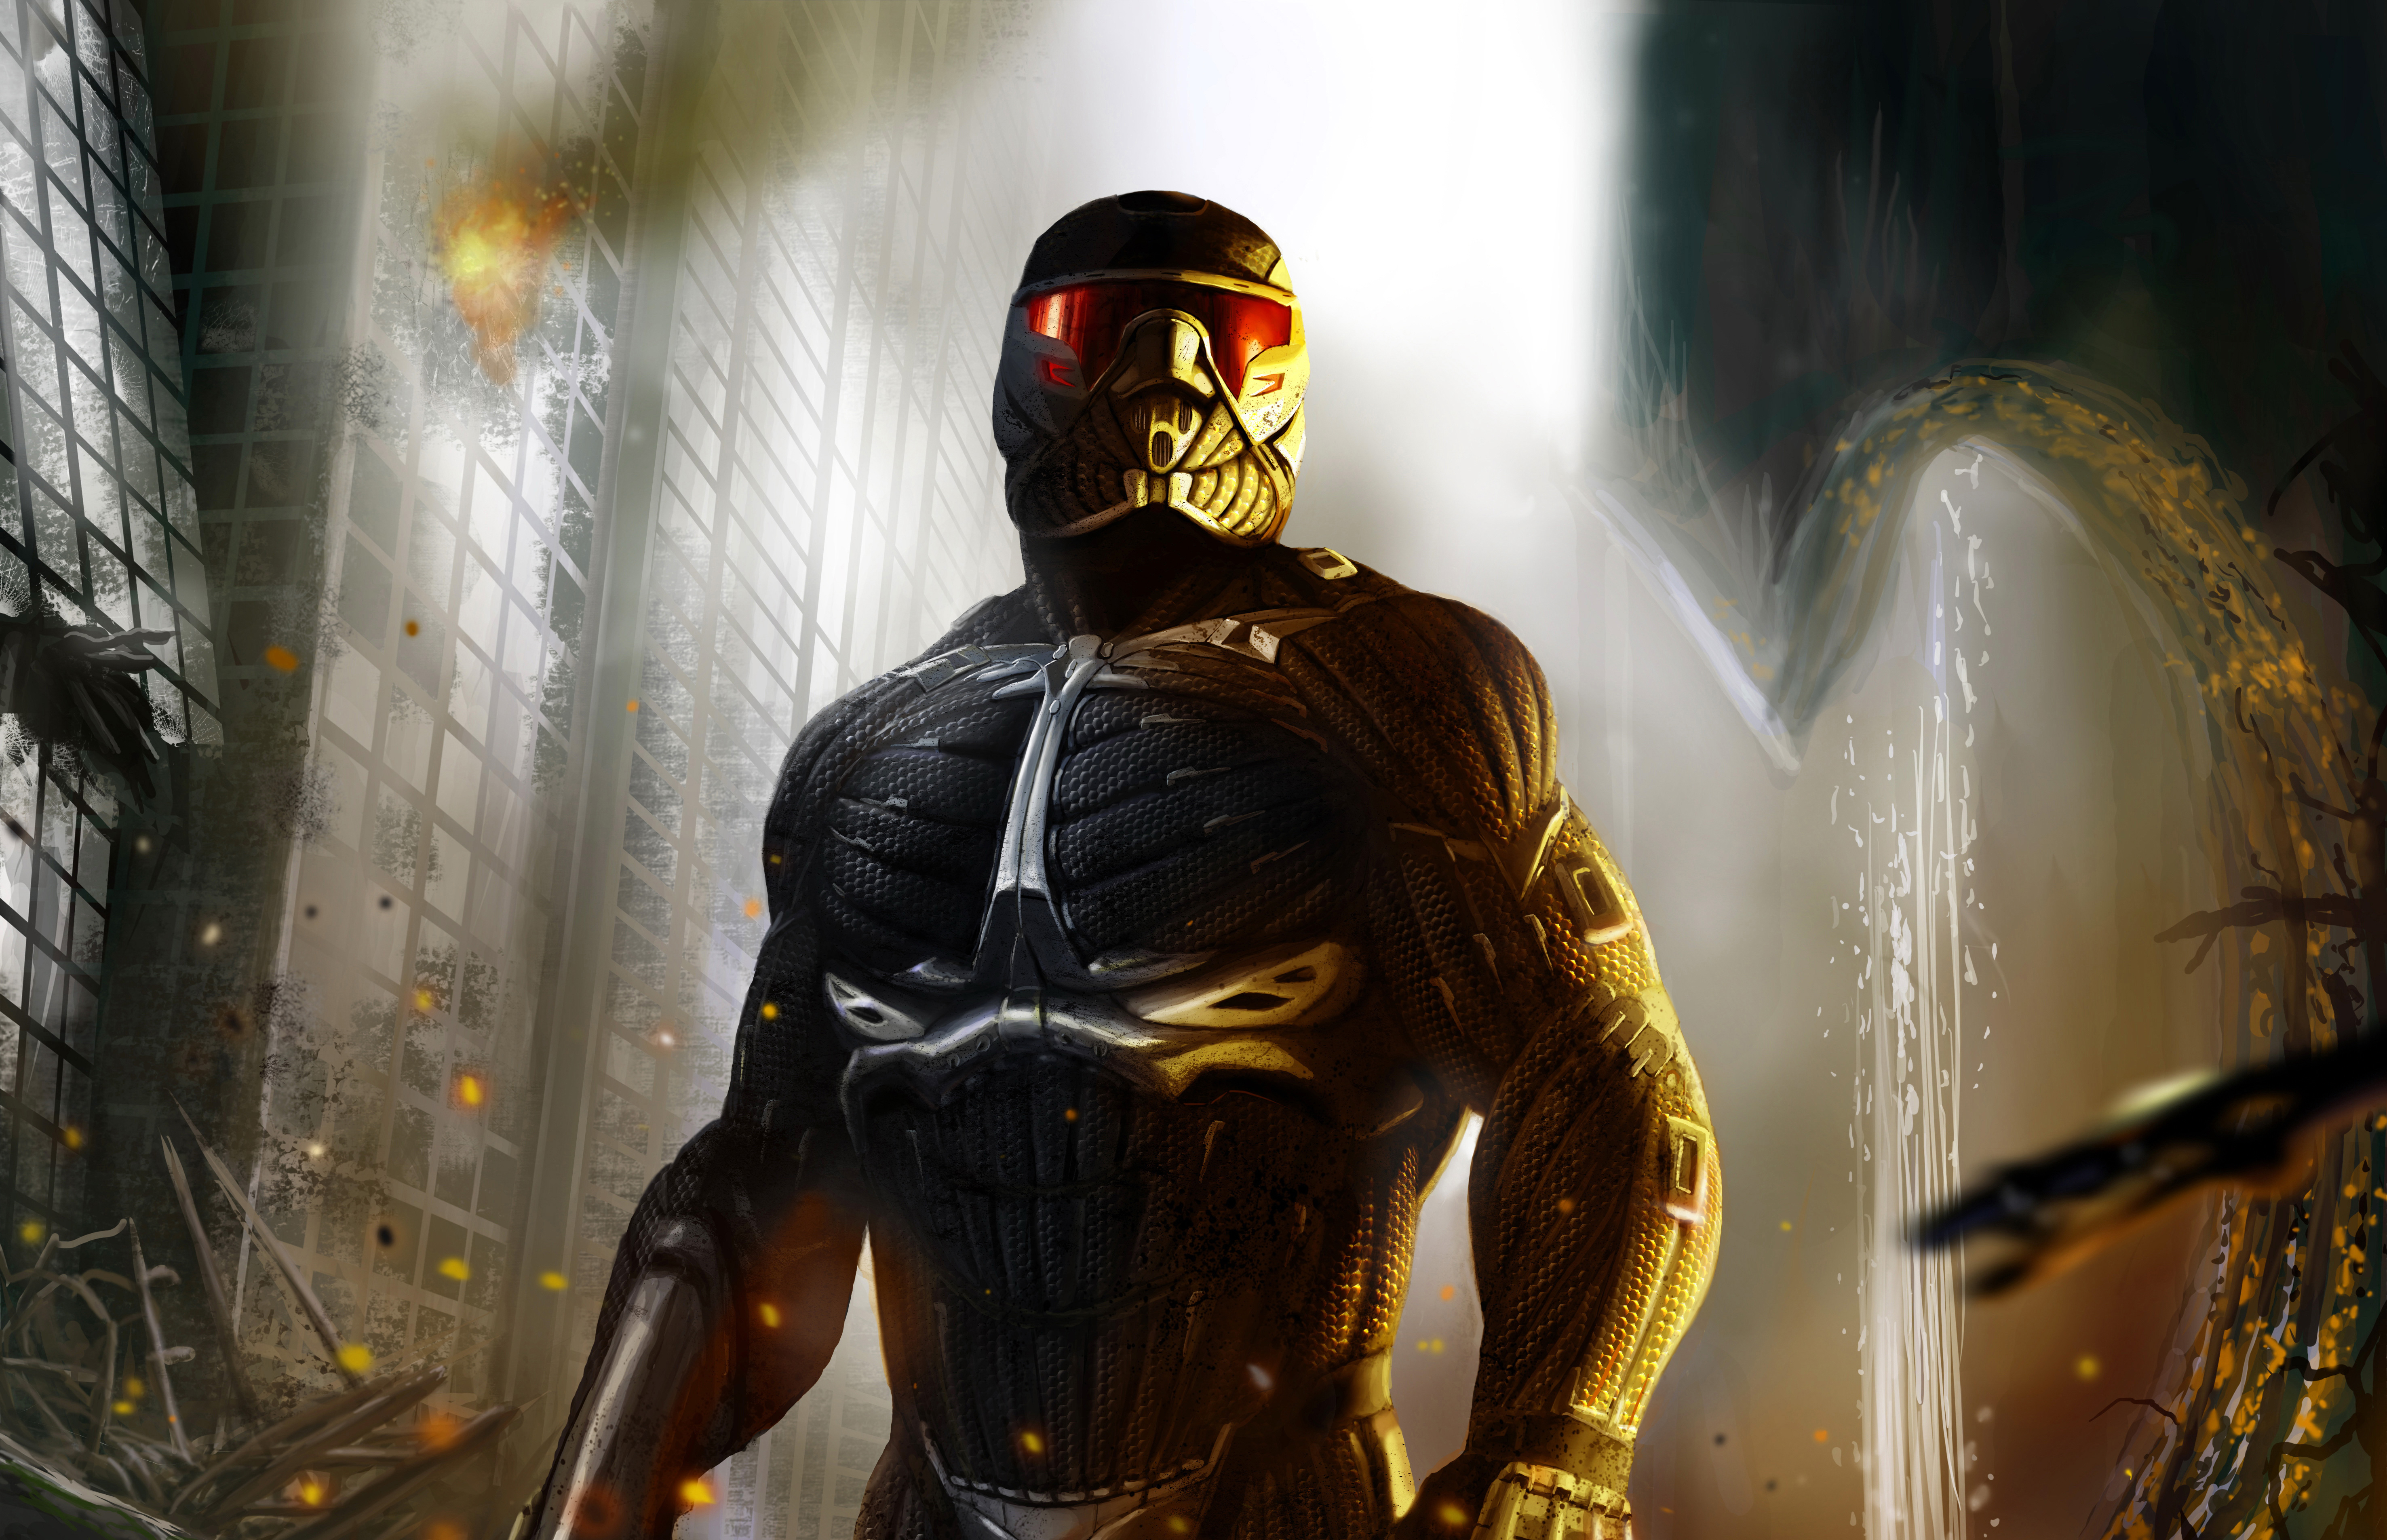 Crysis nanosuit hd games k wallpapers images backgrounds photos and pictures